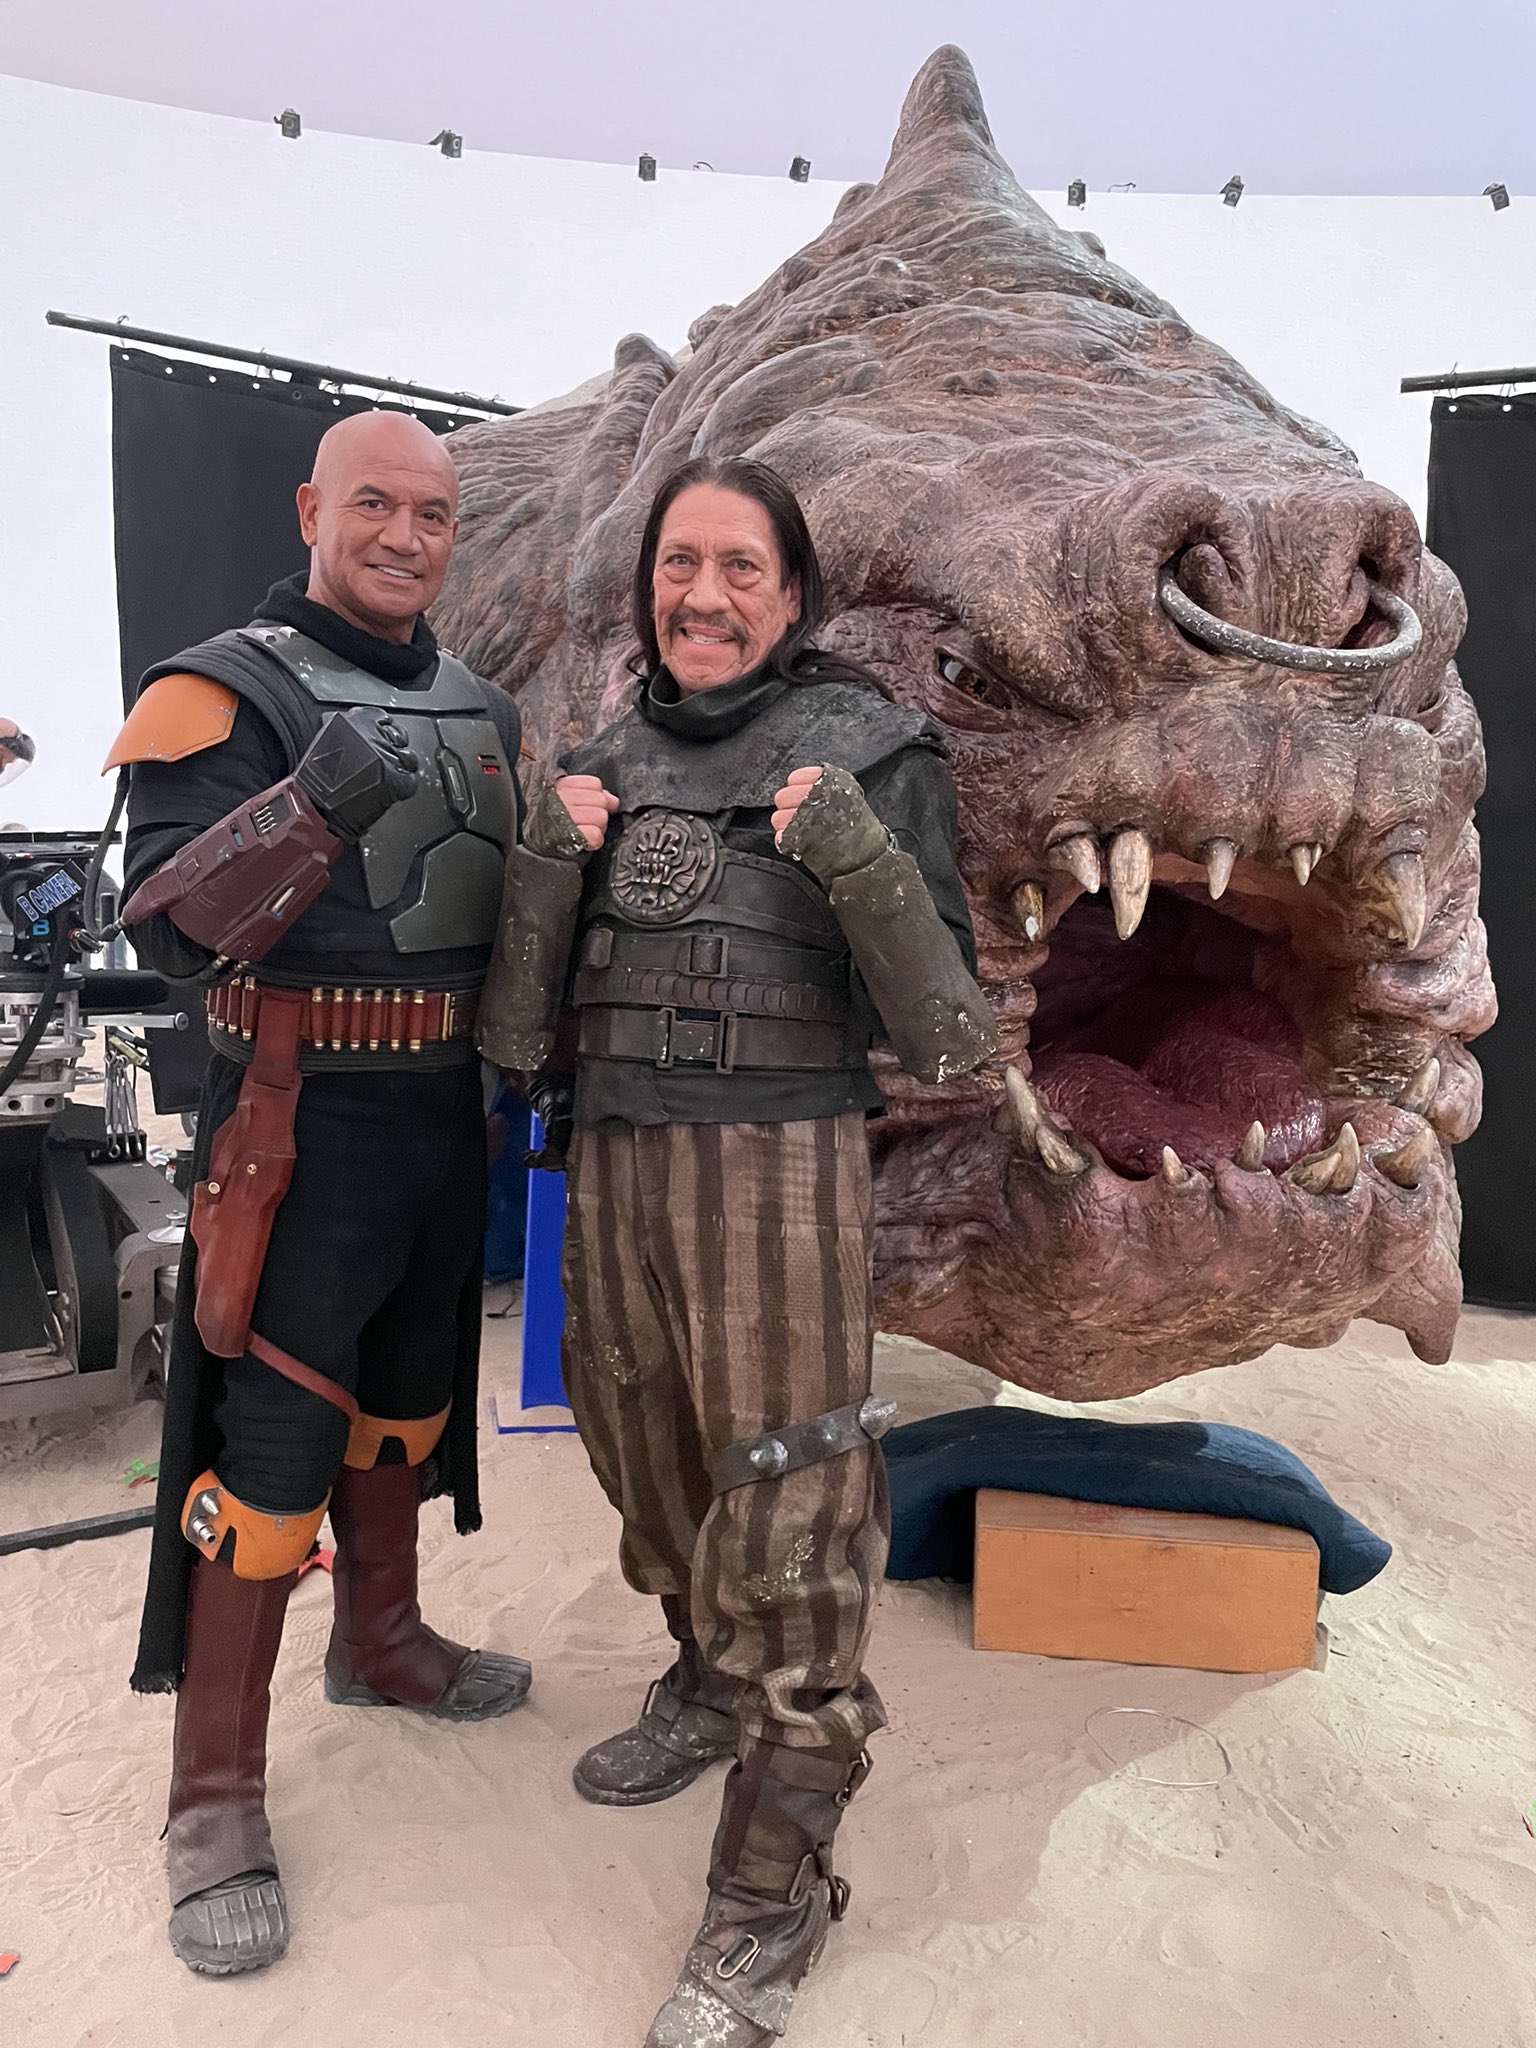 Danny Trejo on Twitter: "Machete finally made it into space, Star Wars! It was great working with Temuera others #TheBookOfBobaFett! https://t.co/xtDCivdm68" / Twitter